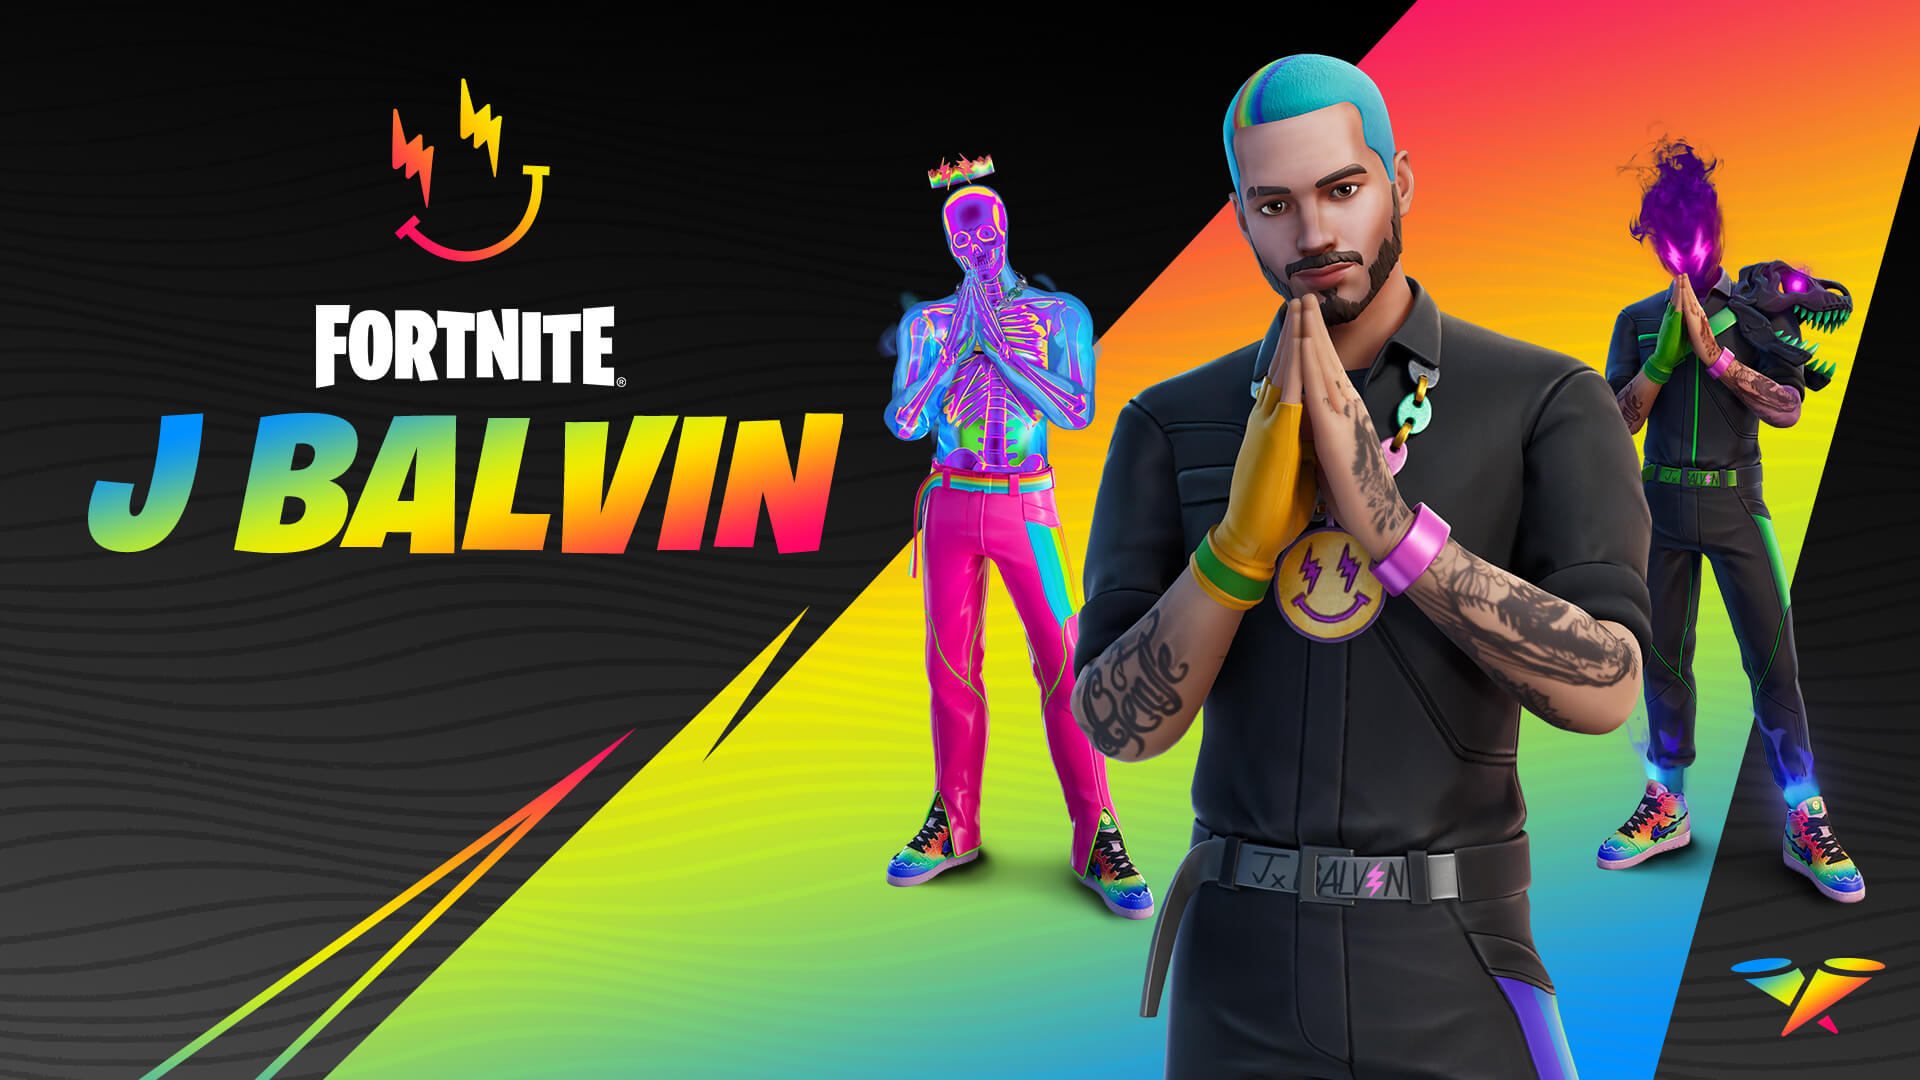 Three versions of the J Balvin Fortnite skin - one is realistic, one is a skeleton and another is more spectral with a dinosaur skull shoulder pad